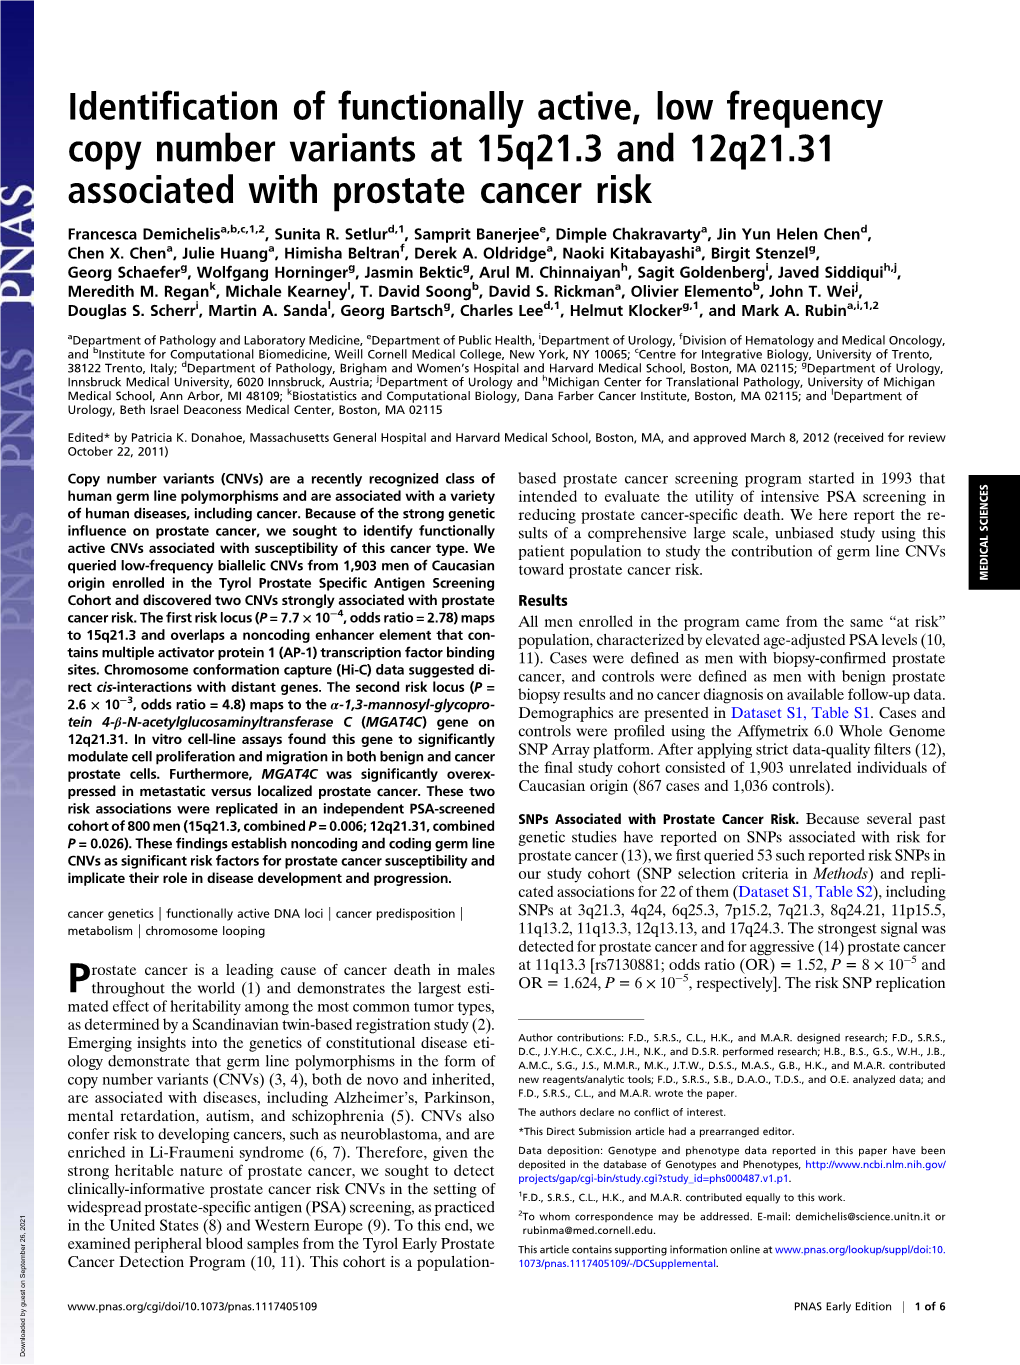 Identification of Functionally Active, Low Frequency Copy Number Variants at 15Q21.3 and 12Q21.31 Associated with Prostate Cance